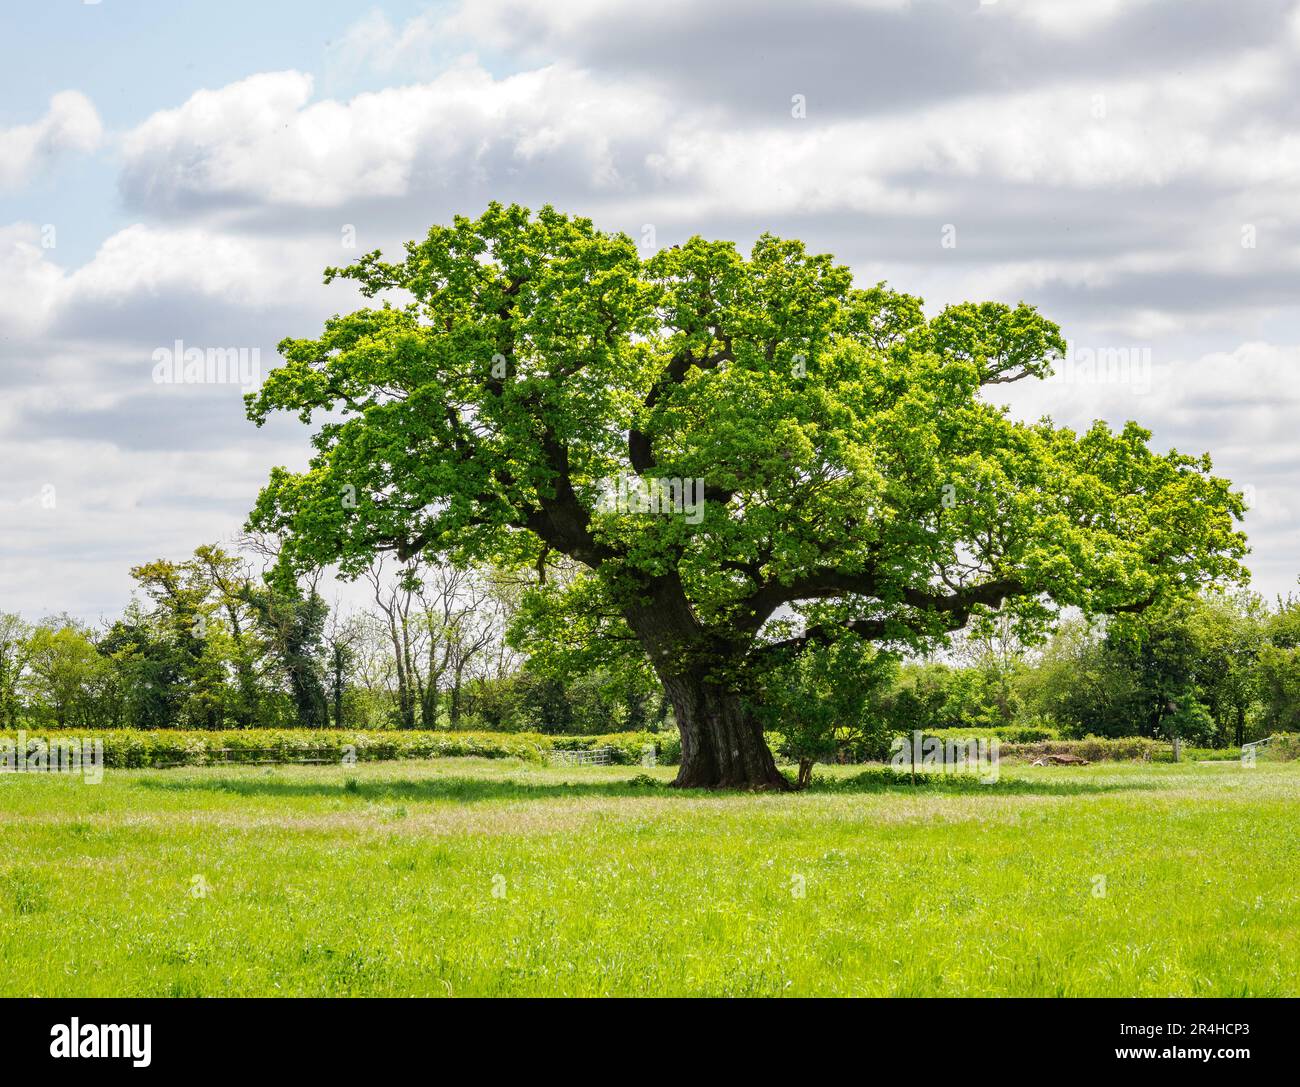 Mature English Oak tree Quercus robur in an open field by the River Thames in Wiltshire UK Stock Photo